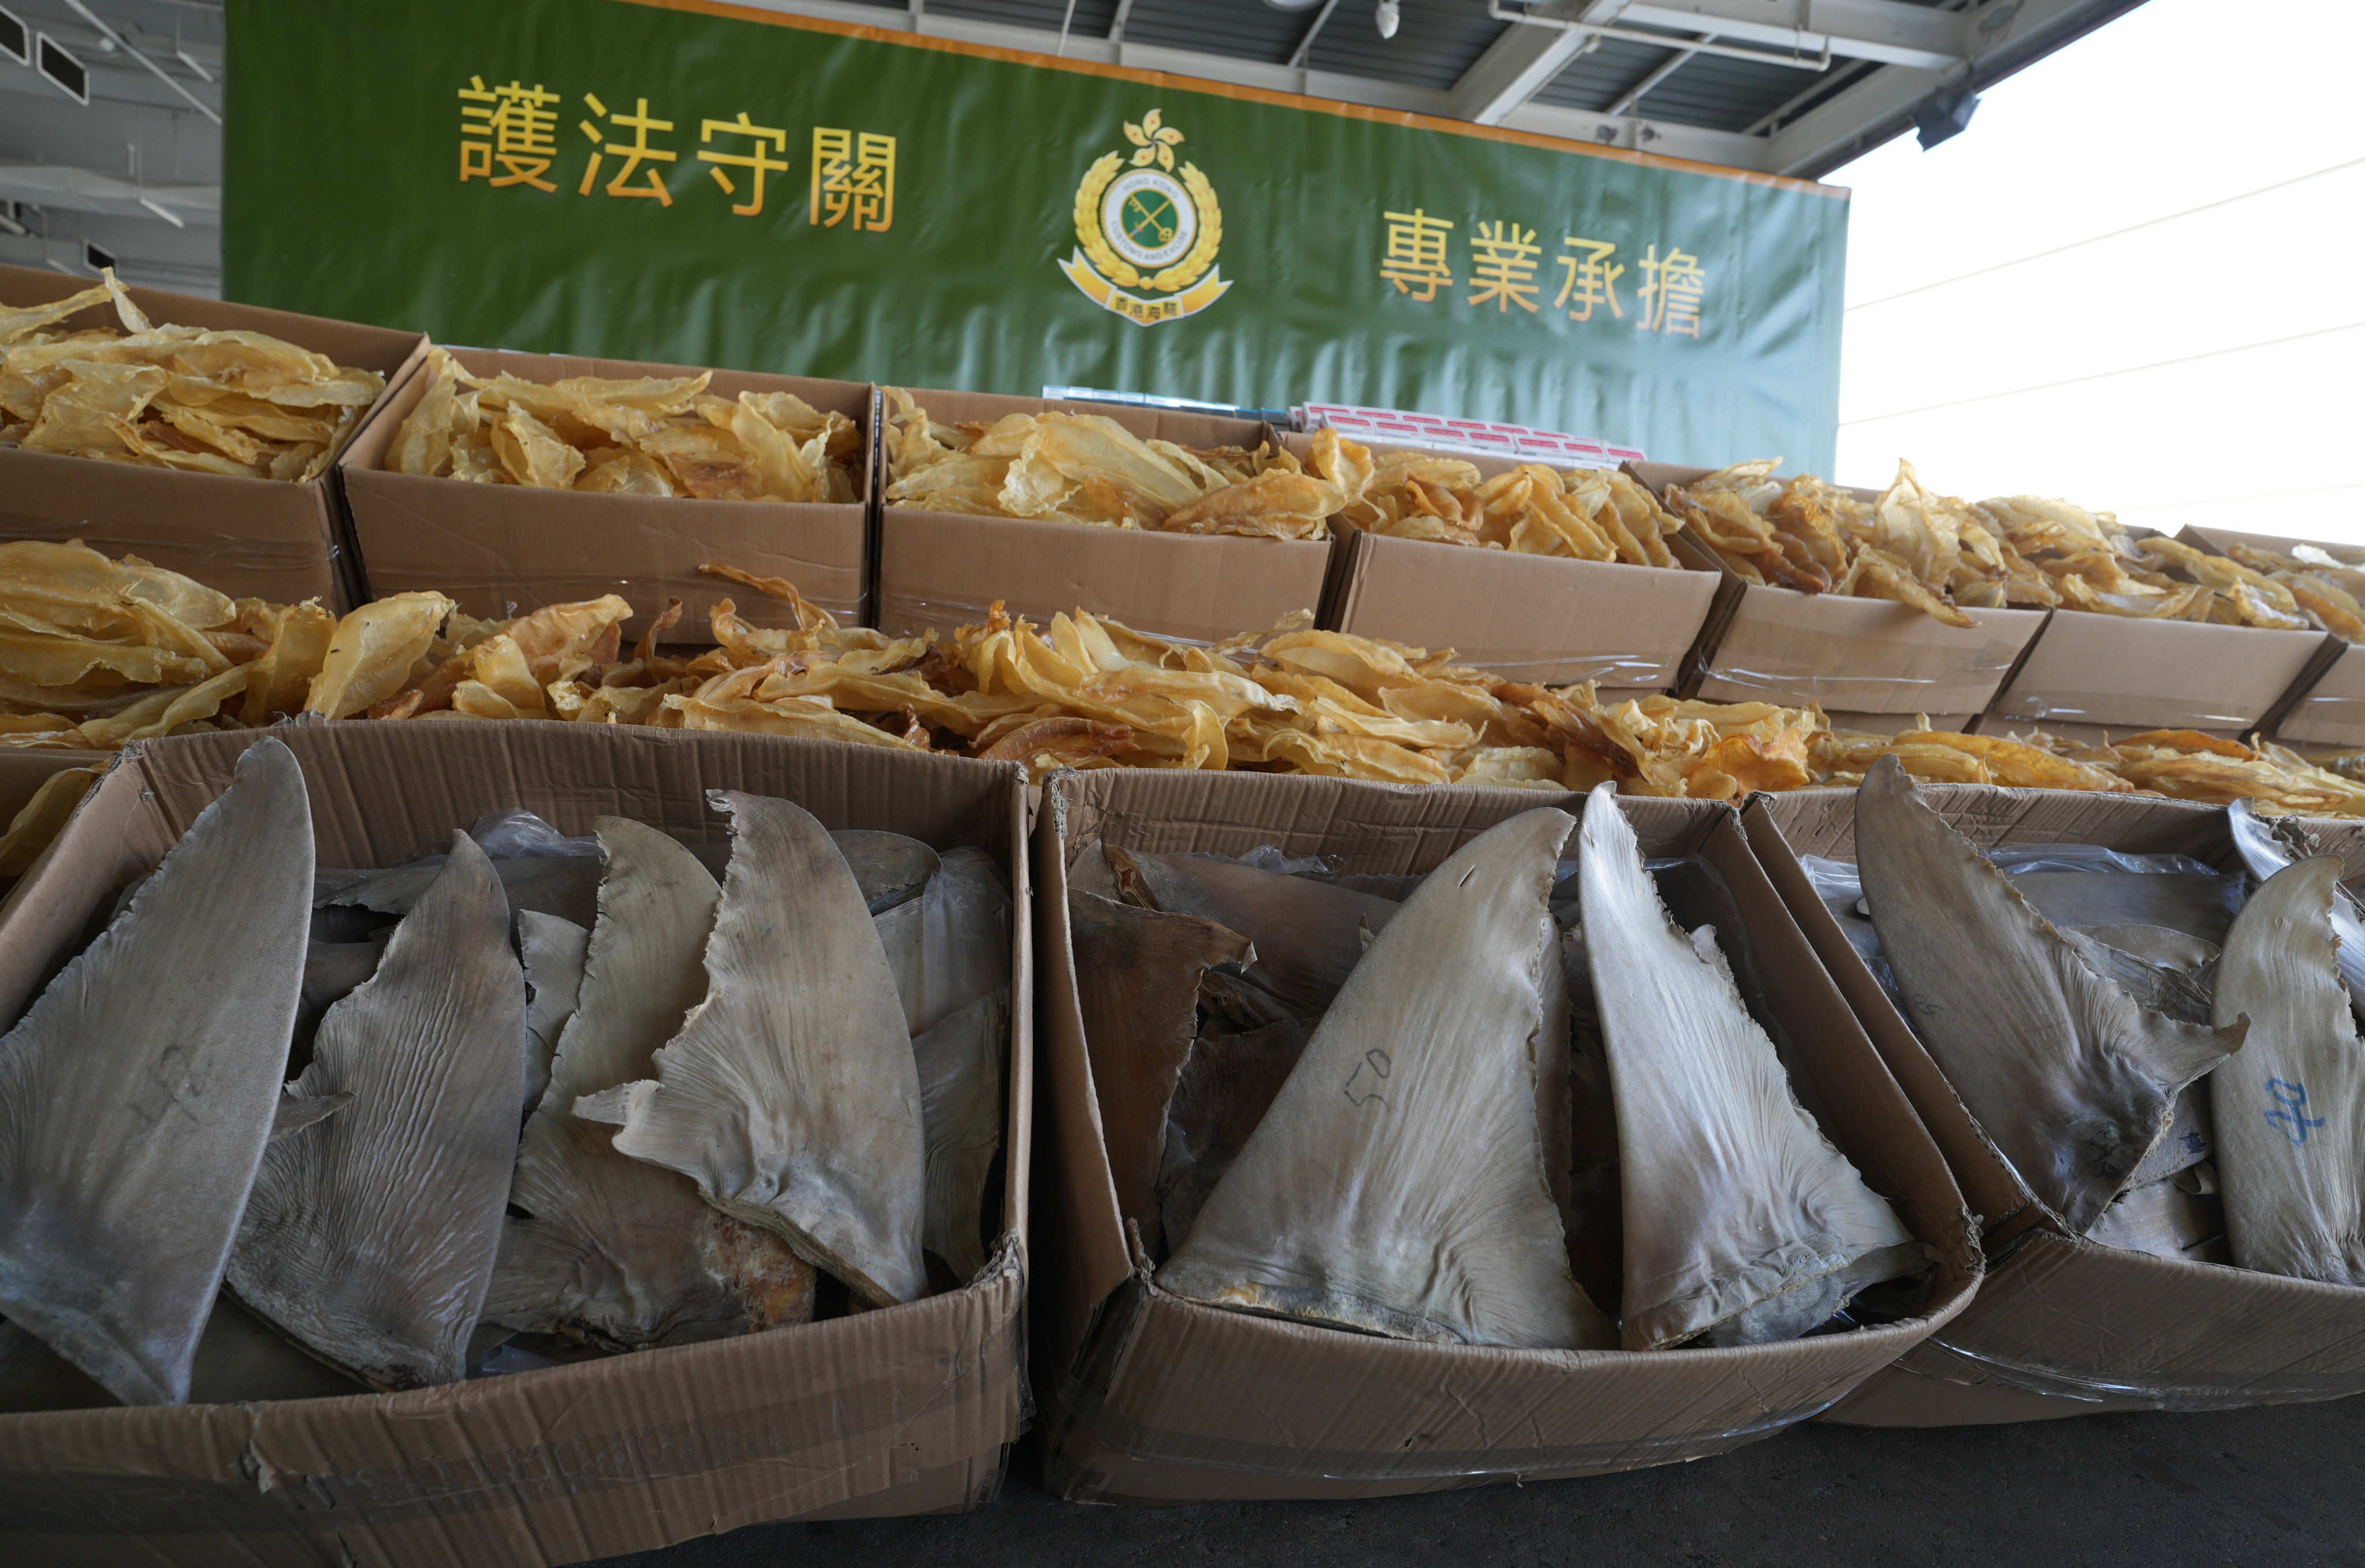 Hong Kong Customs holds a press conference on January 3 at the River Trade Terminal in Tuen Mun, on a smuggling case last year involving dried seafood and cosmetic products with an estimated market value of HK$6 million. Photo: Elson Li